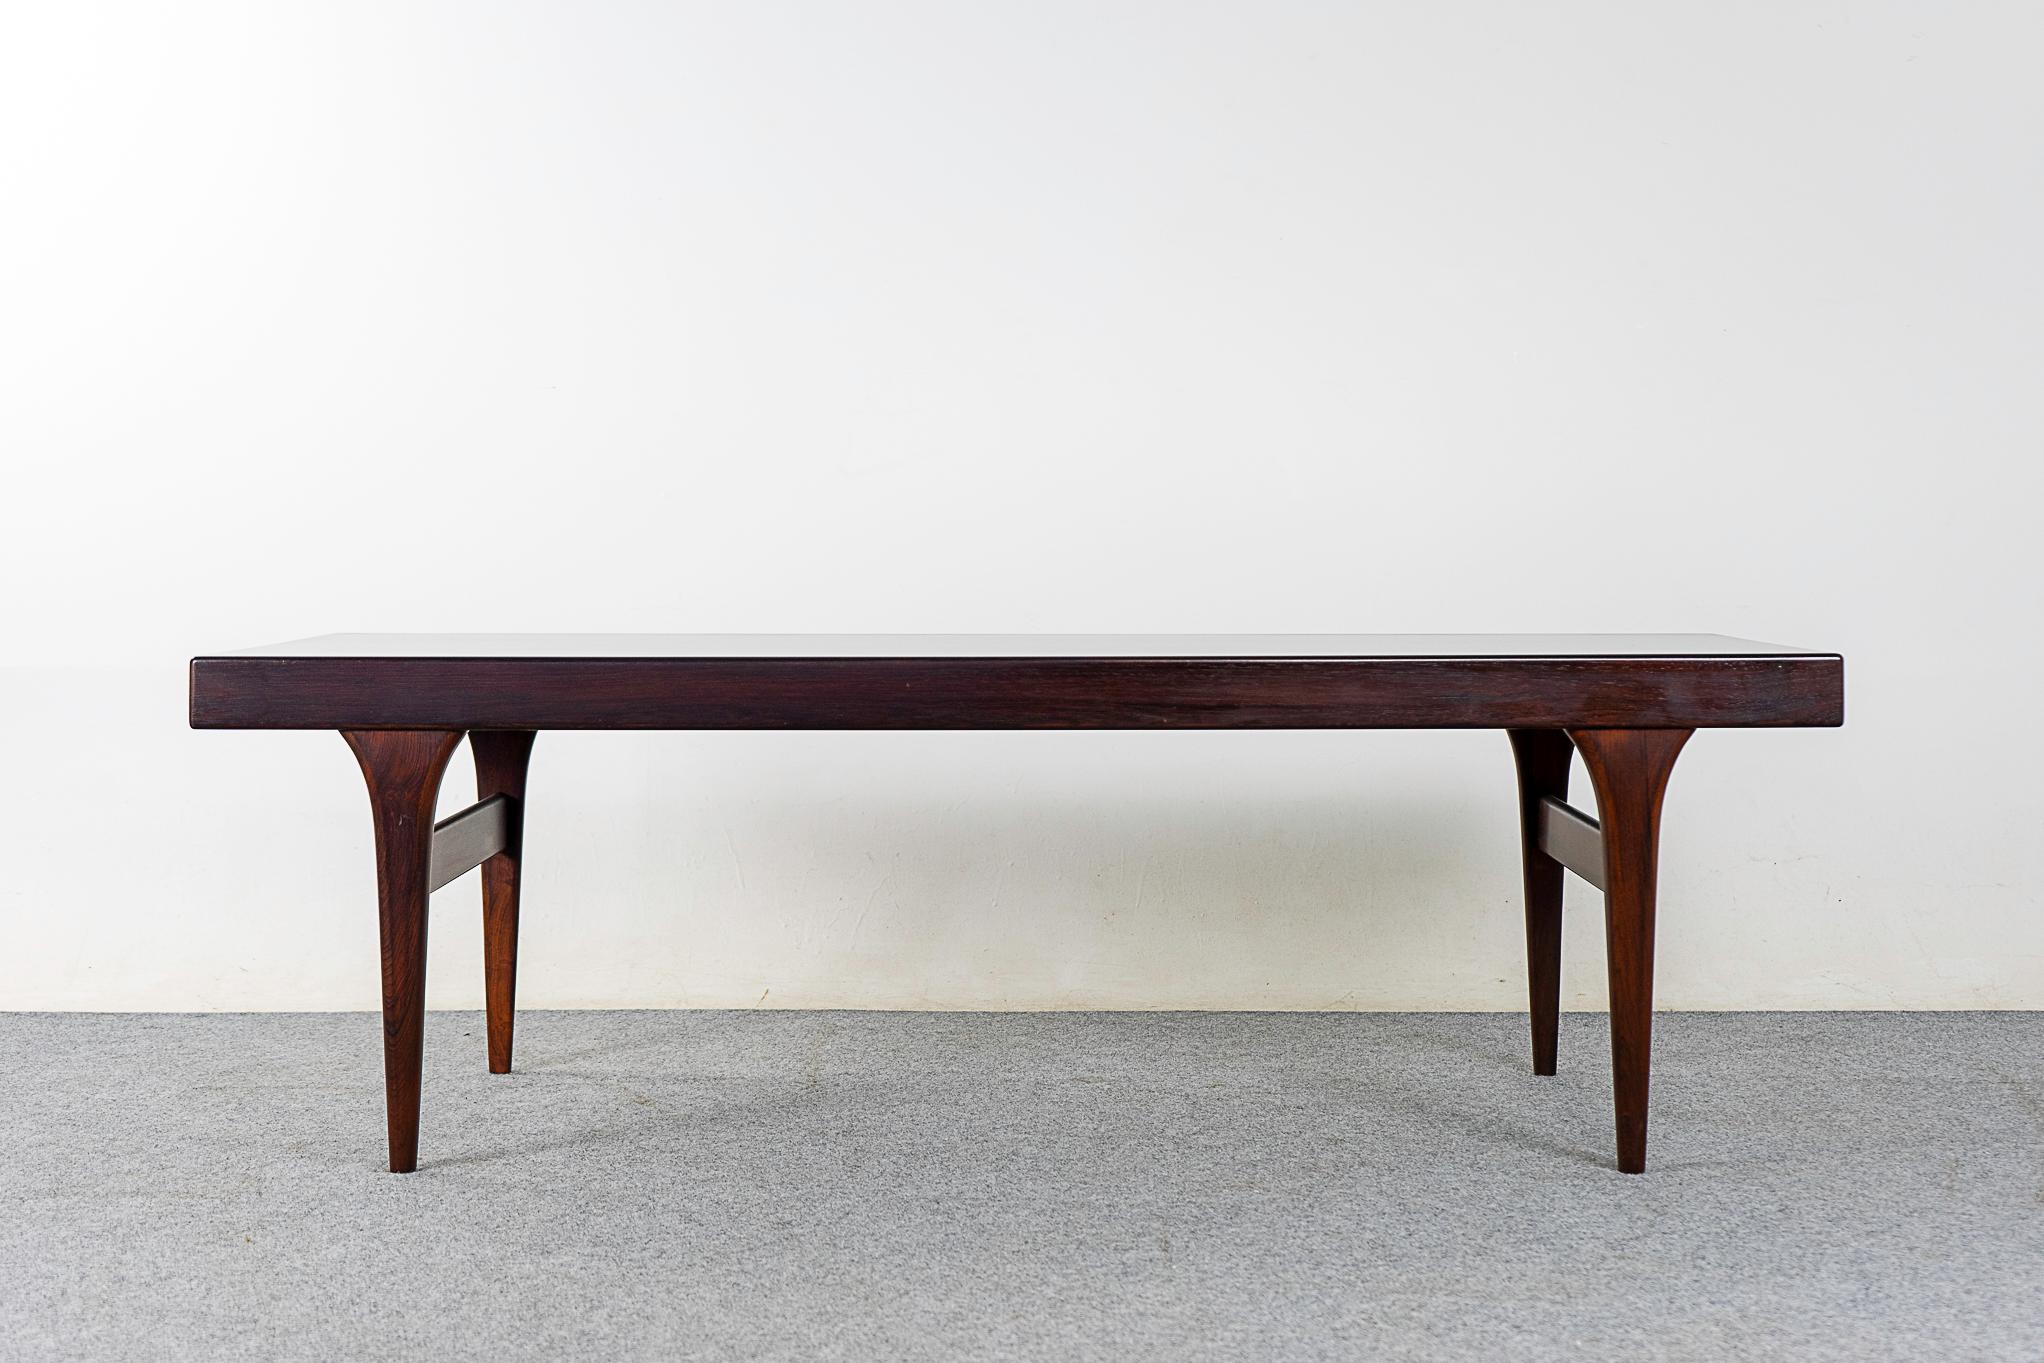 Rosewood mid-century Johannes Andersen coffee table, circa 1960's. Beautiful book matched veneer and solid wood edge along its length. Sculptural legs and cross supports. Each end has convenient integrated extenders, one teak and one black laminate